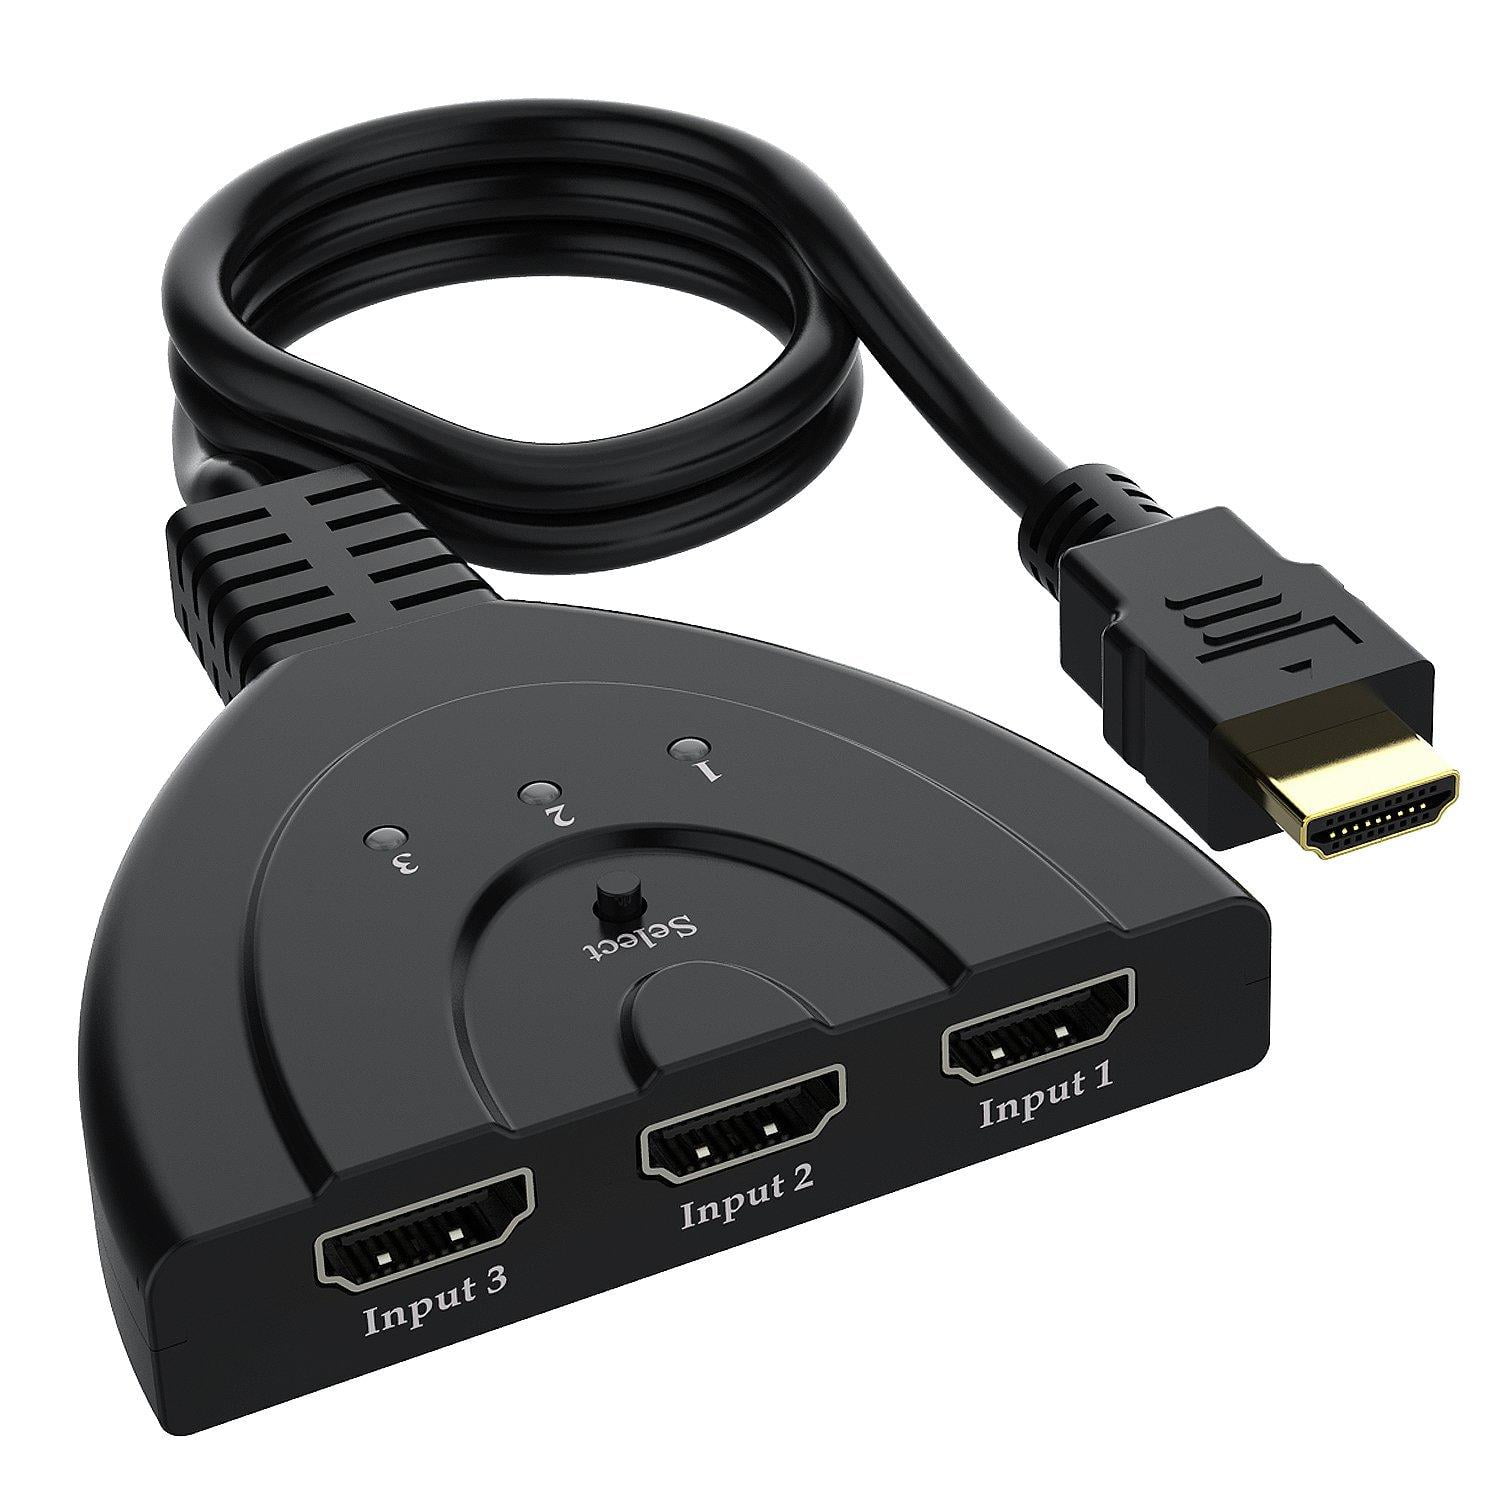 Hdmi switch and splitter